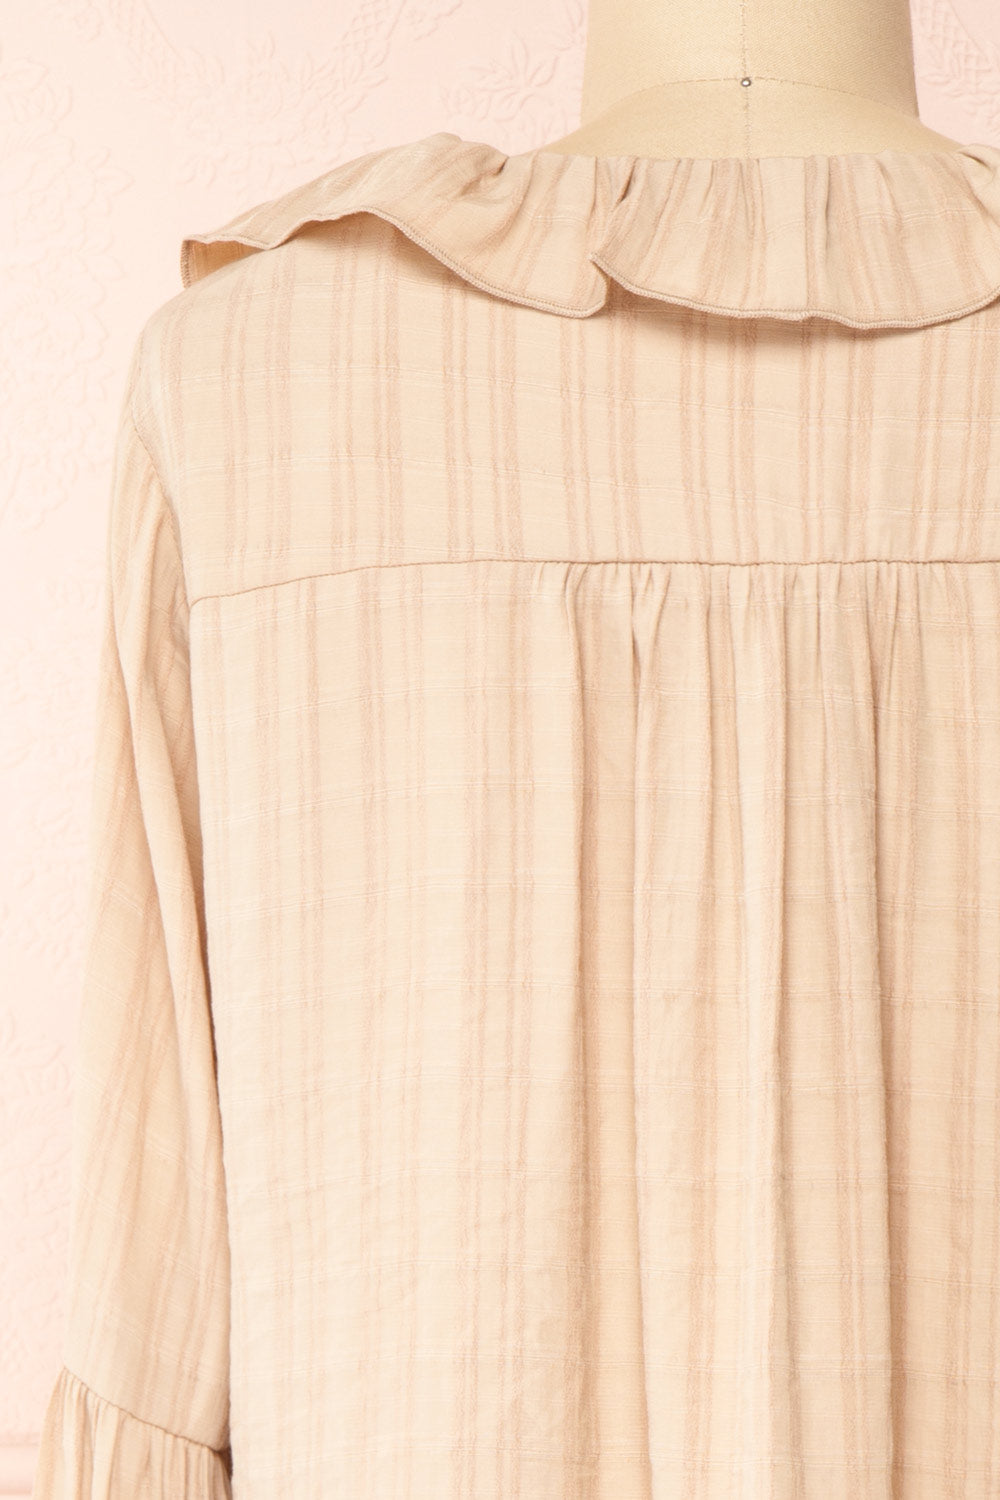 Adorae Taupe Long Sleeve Blouse w/ Ruffled Collar | Boutique 1861 back close-up